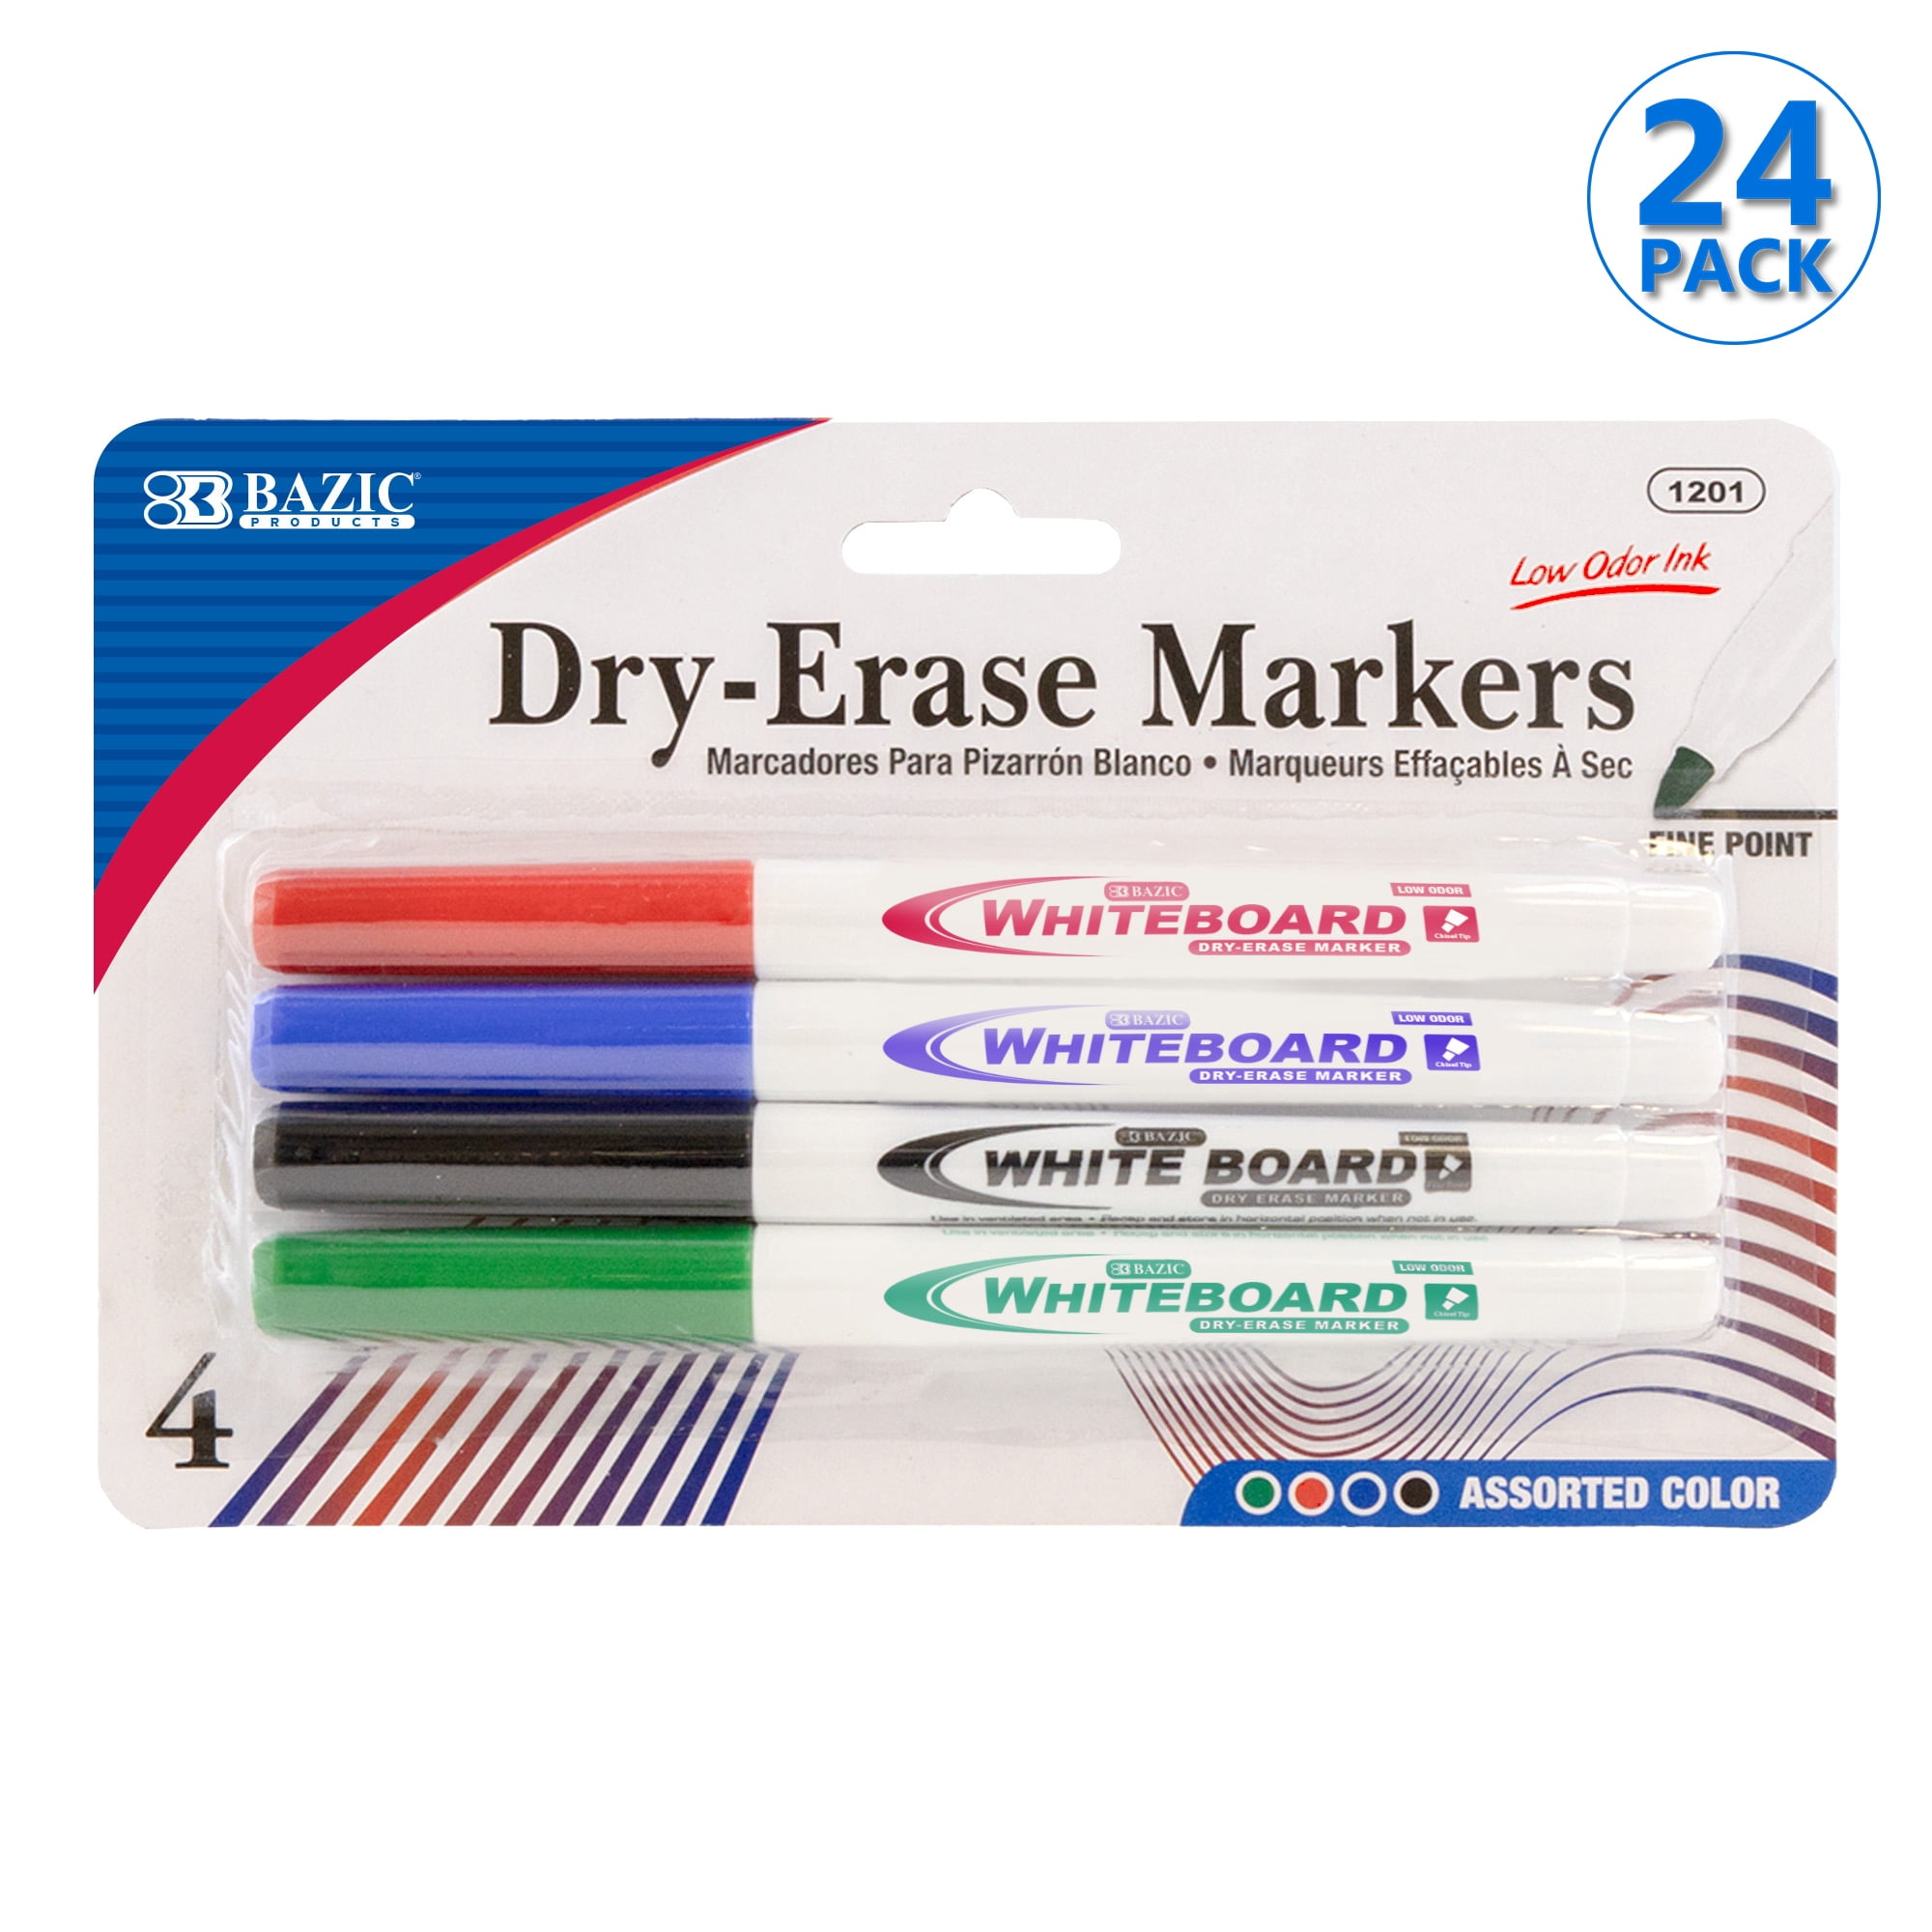 BAZIC Dry Erase Marker Assorted Color Chisel Tip, Whiteboard Pen Marcador,  Low Odor Markers White Board Pens (3/Pack), 1-Pack